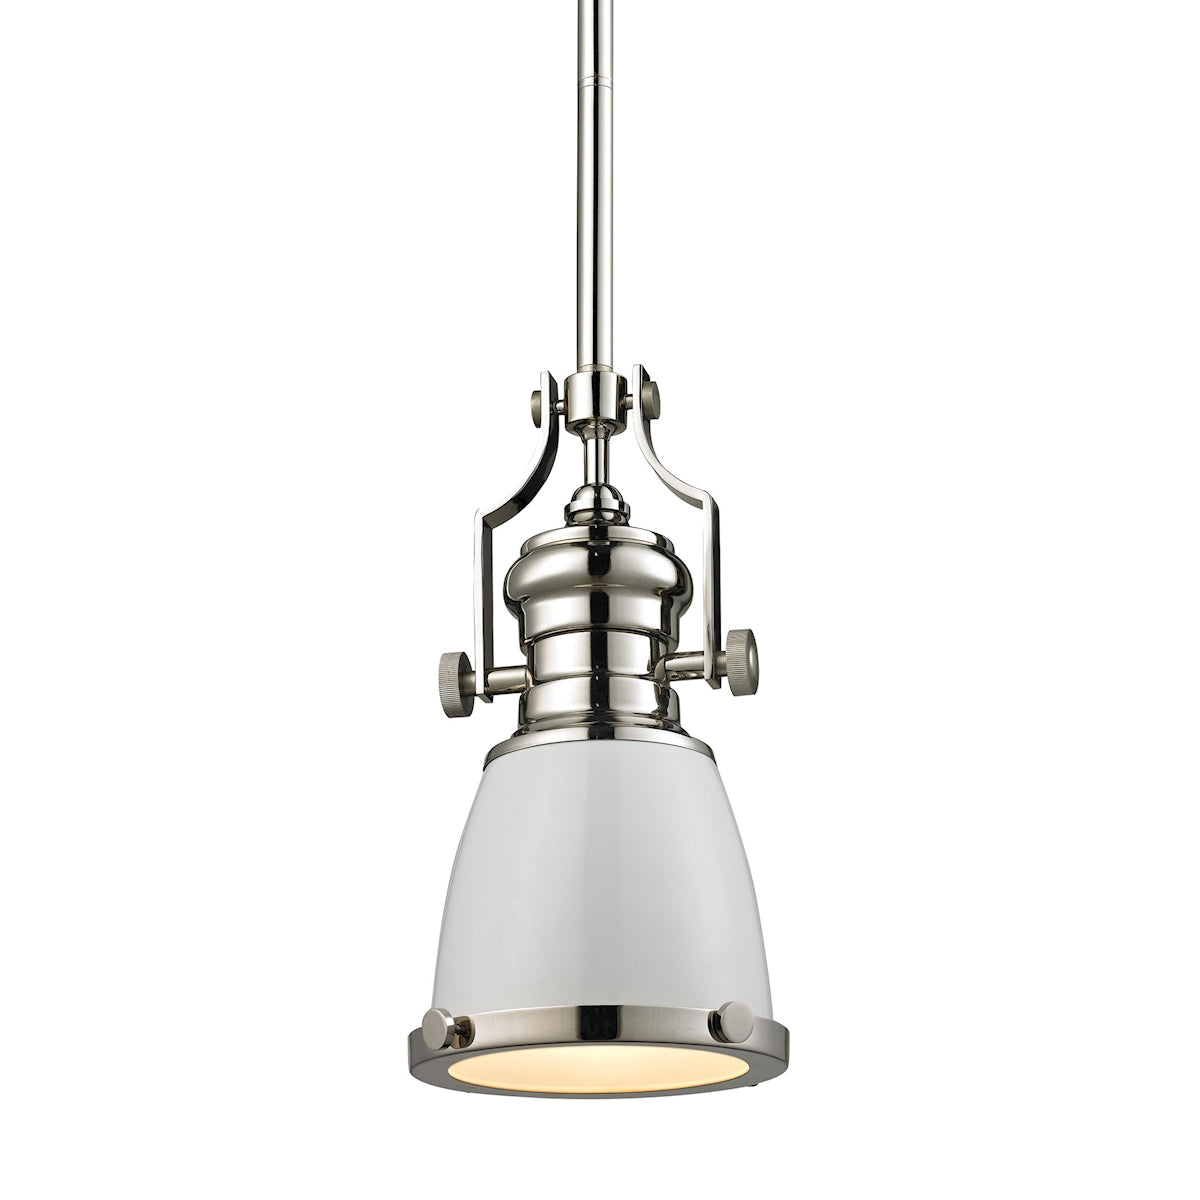 ELK Lighting 66514-1 Chadwick 1-Light Mini Pendant in Polished Nickel with Gloss White Shade